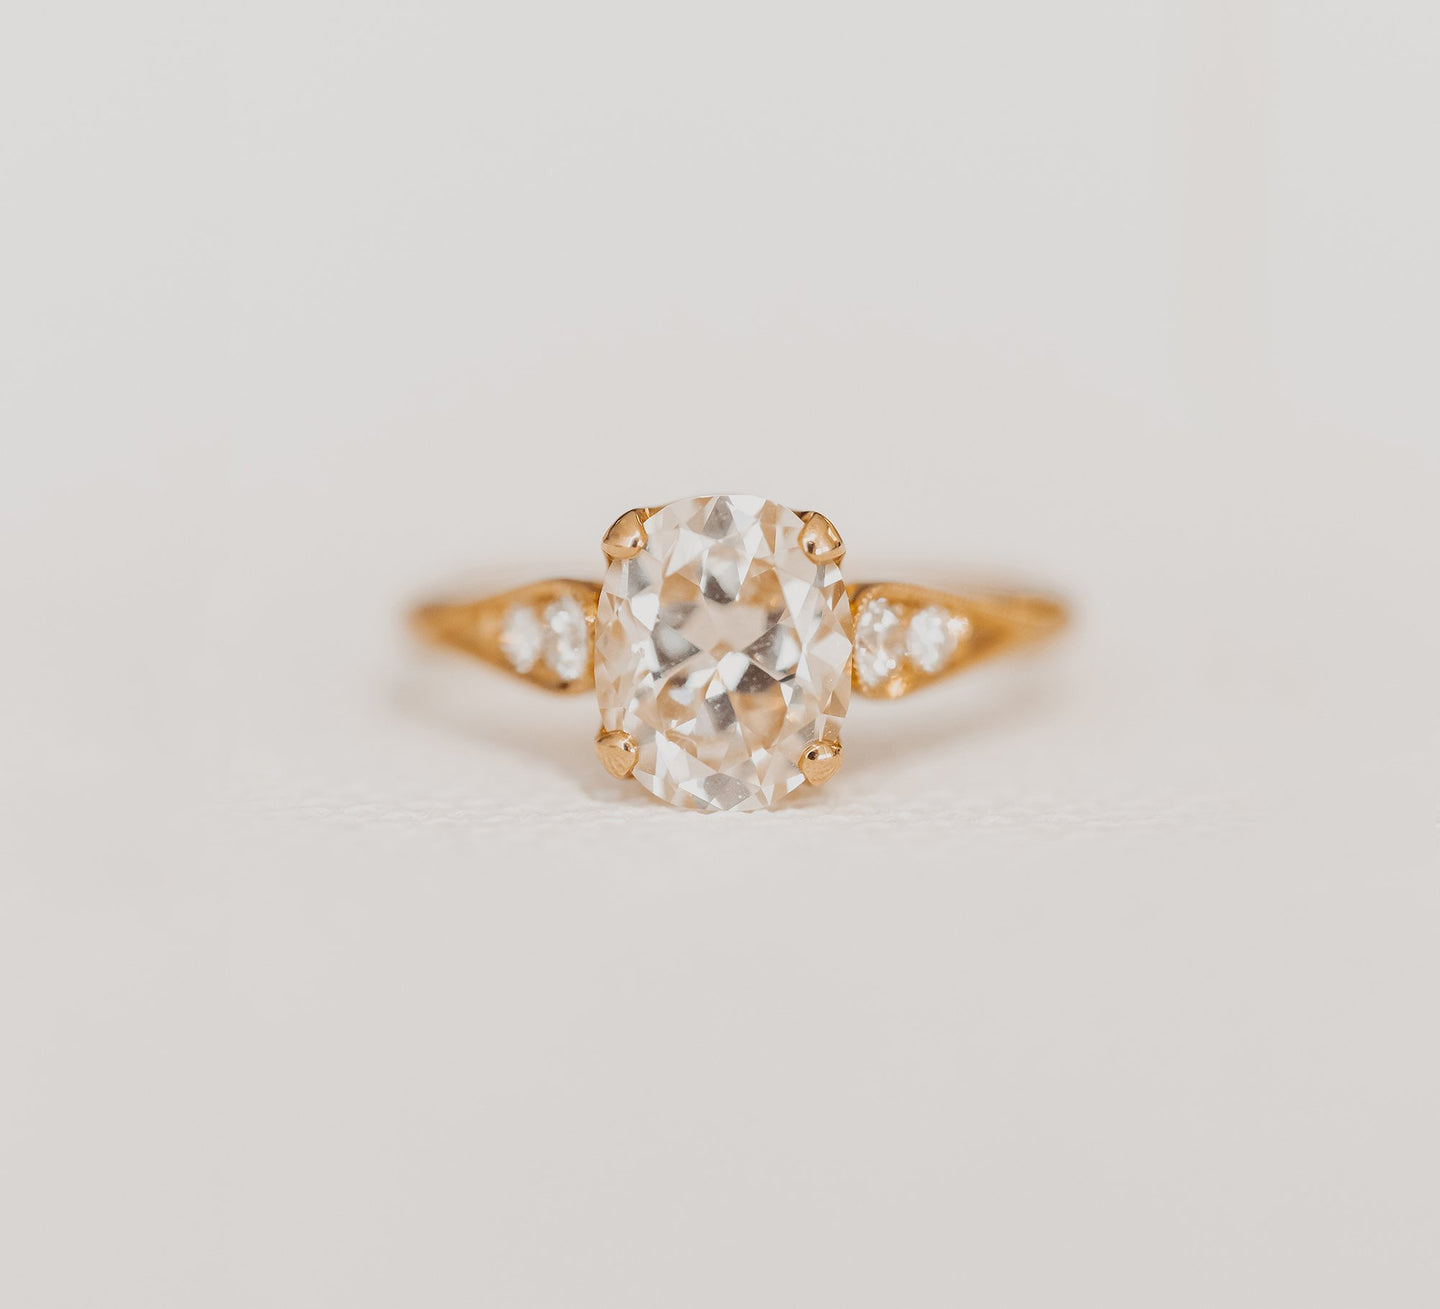 Antique and Vintage Engagement Rings in San Diego | Harold Stevens